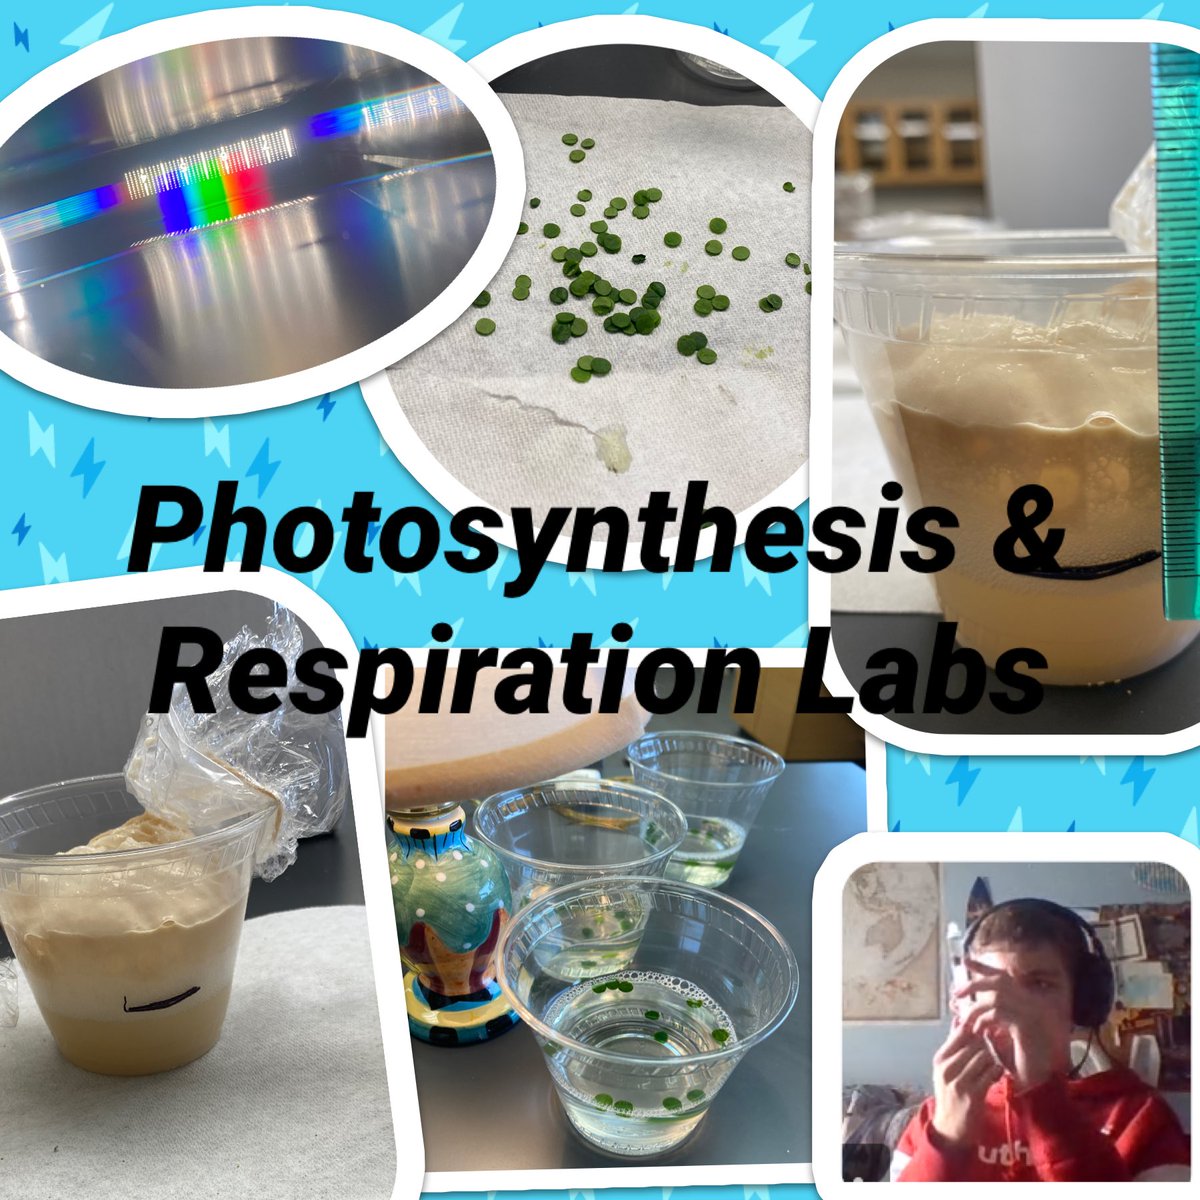 This was a week of at home labs for my students as we explored photosynthesis and respiration. It’s not the same or quite as in depth but we’re DOING science to learn science #DOscience #wearecue #cvtechtalk